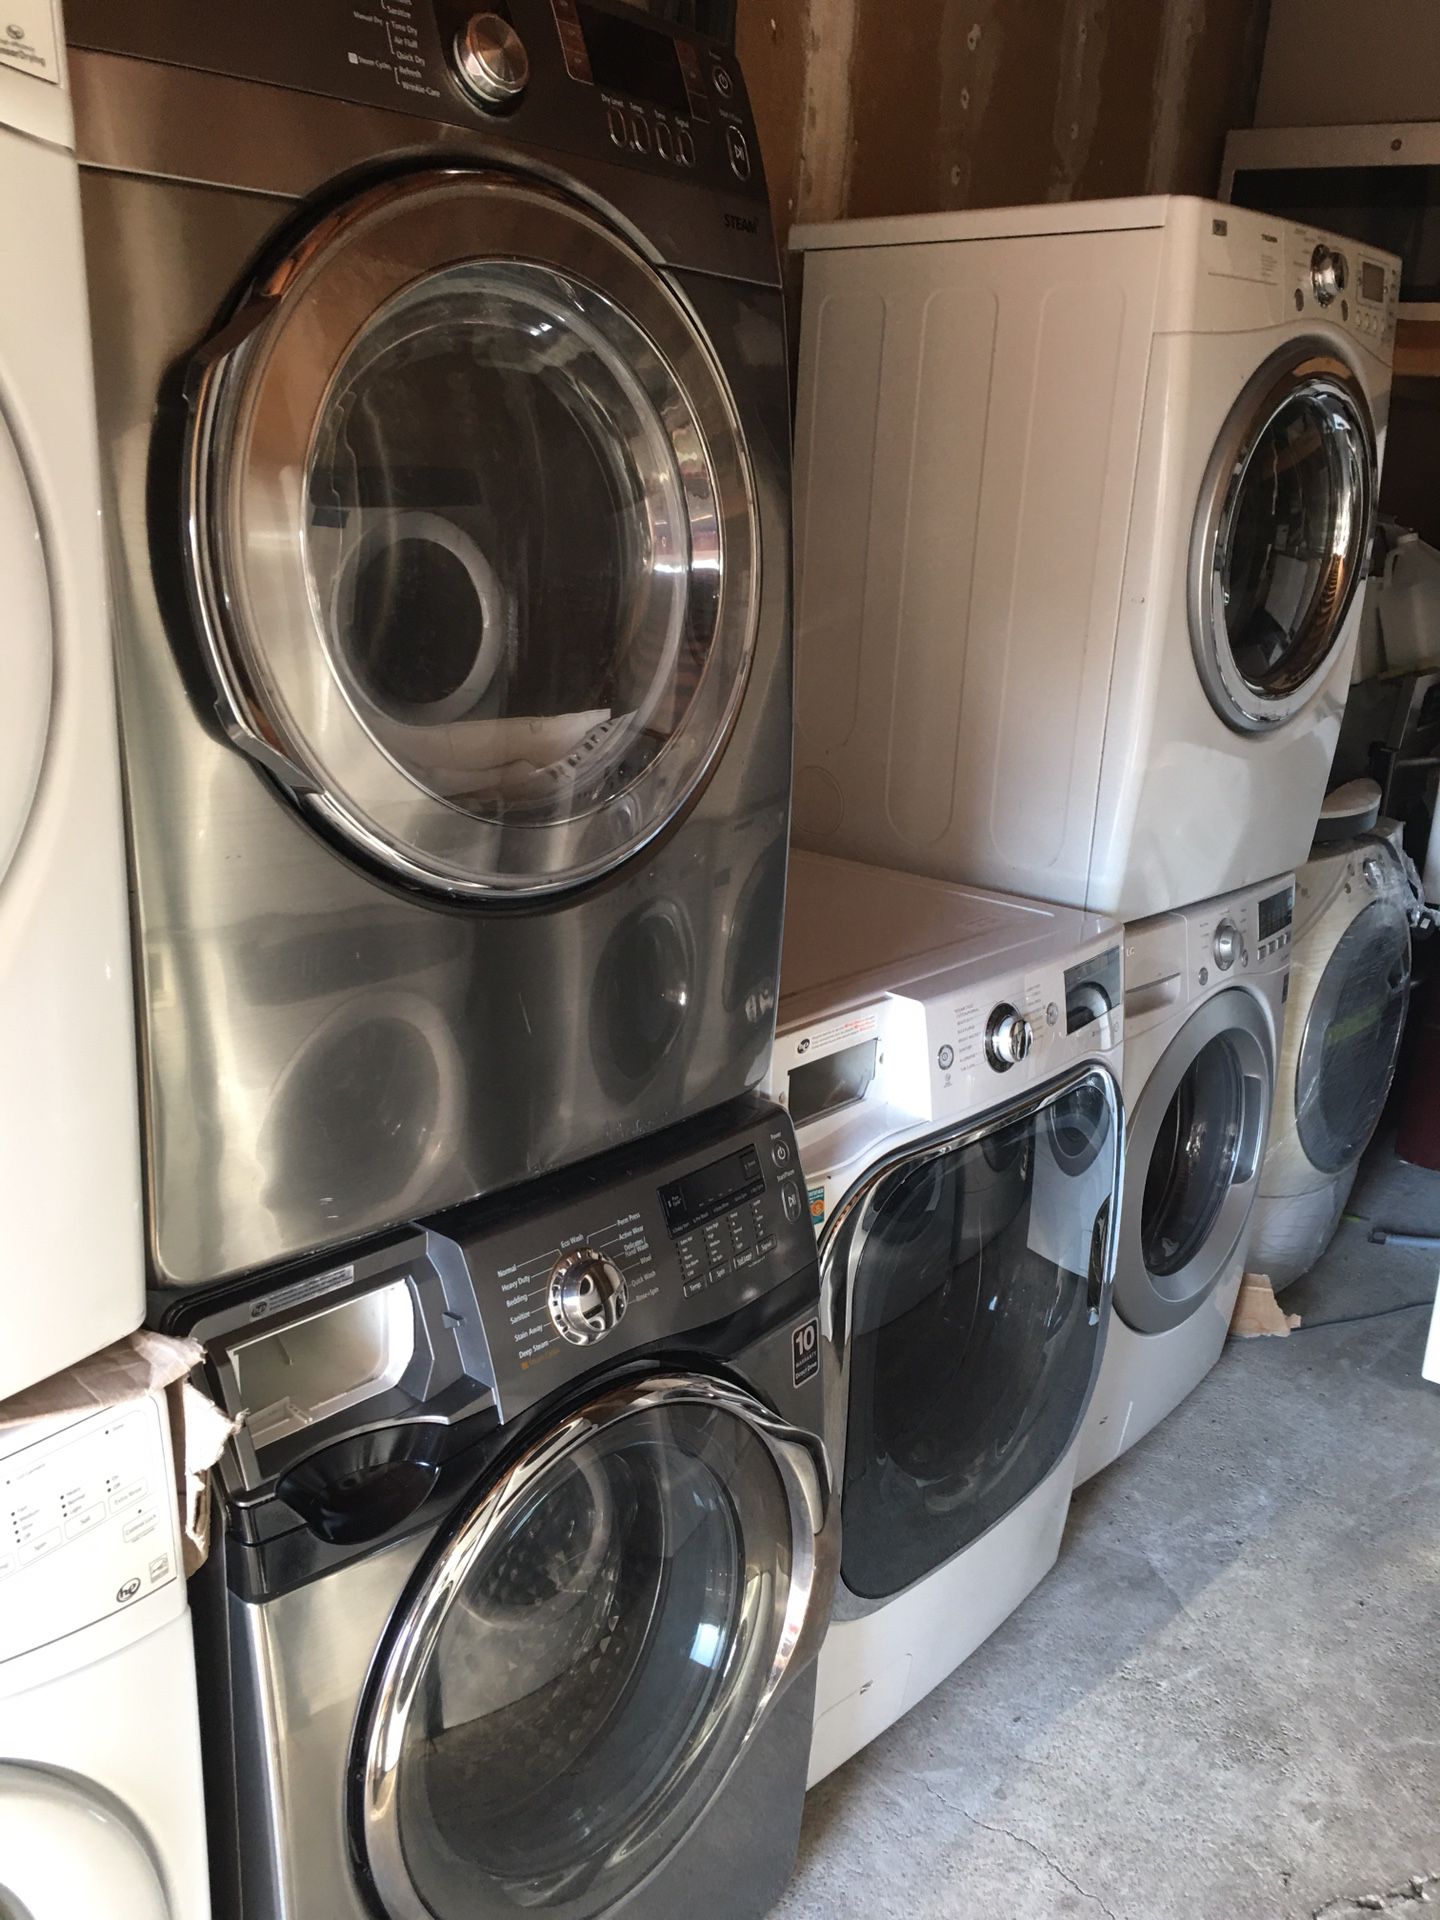 Samsung washer and electric ⚡️ dryer setting